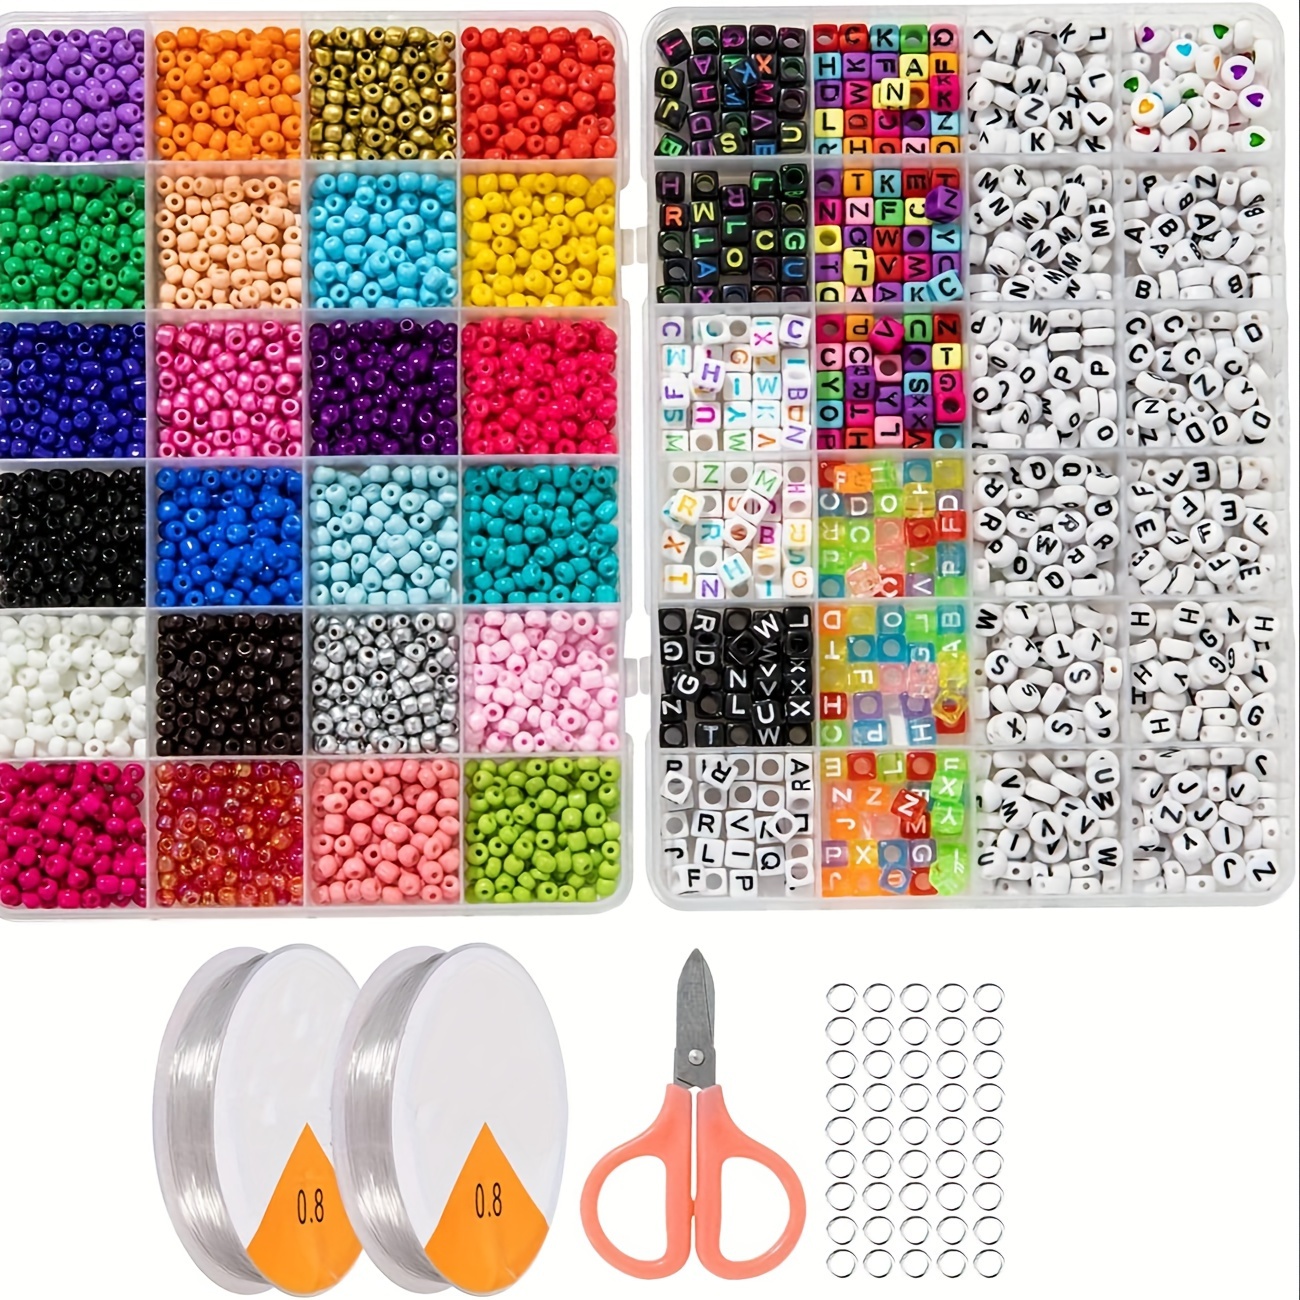 10800pcs 3mm Glass Seed Beads Craft Kit and 1200pcs Letter